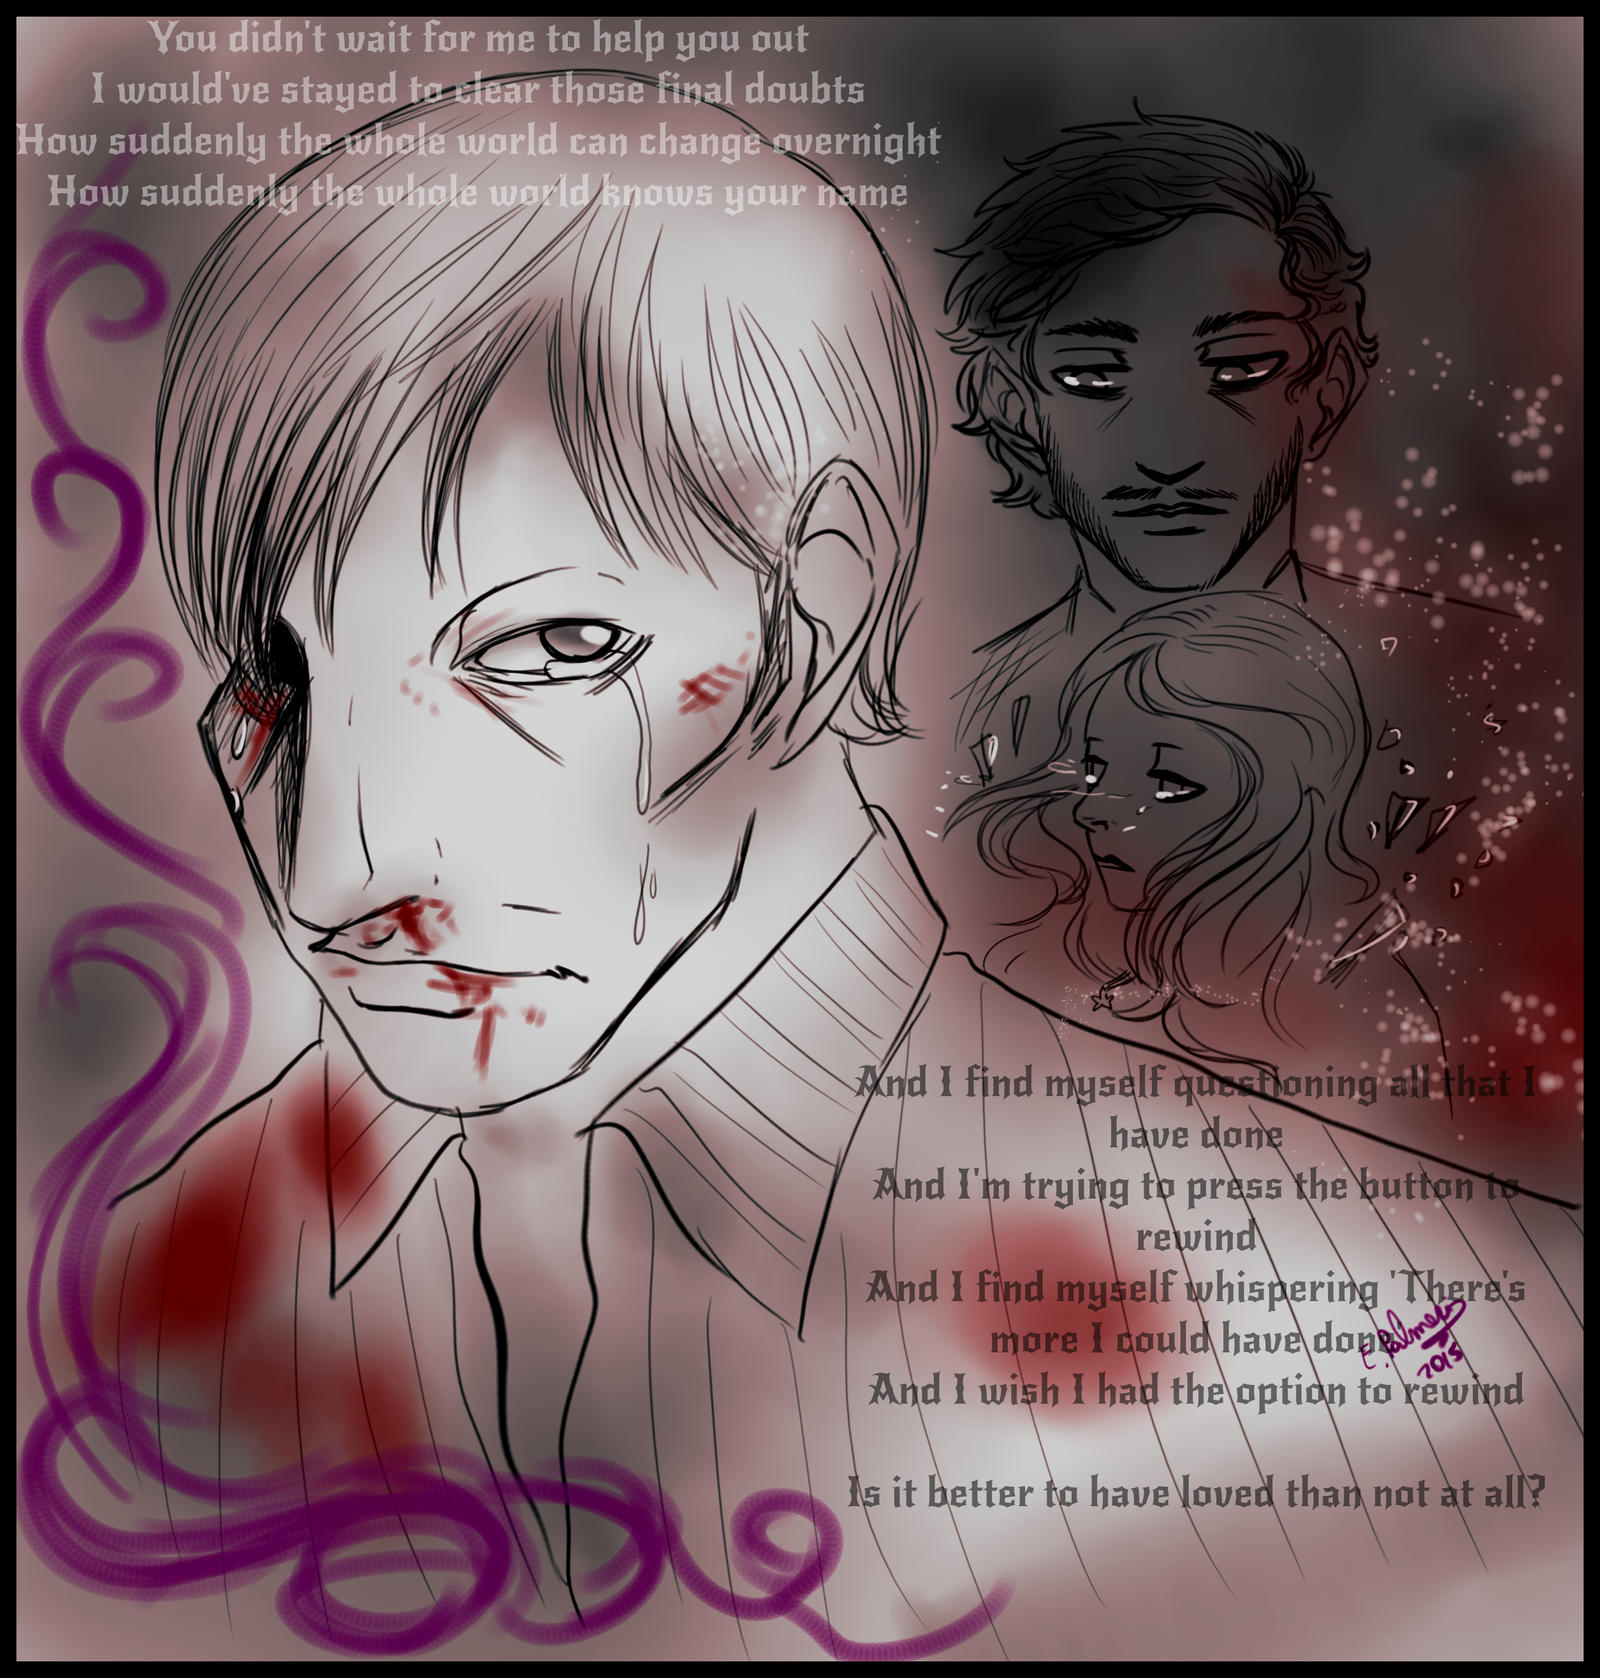 Hannibal - It is bettere to have loved by FuriarossaAndMimma